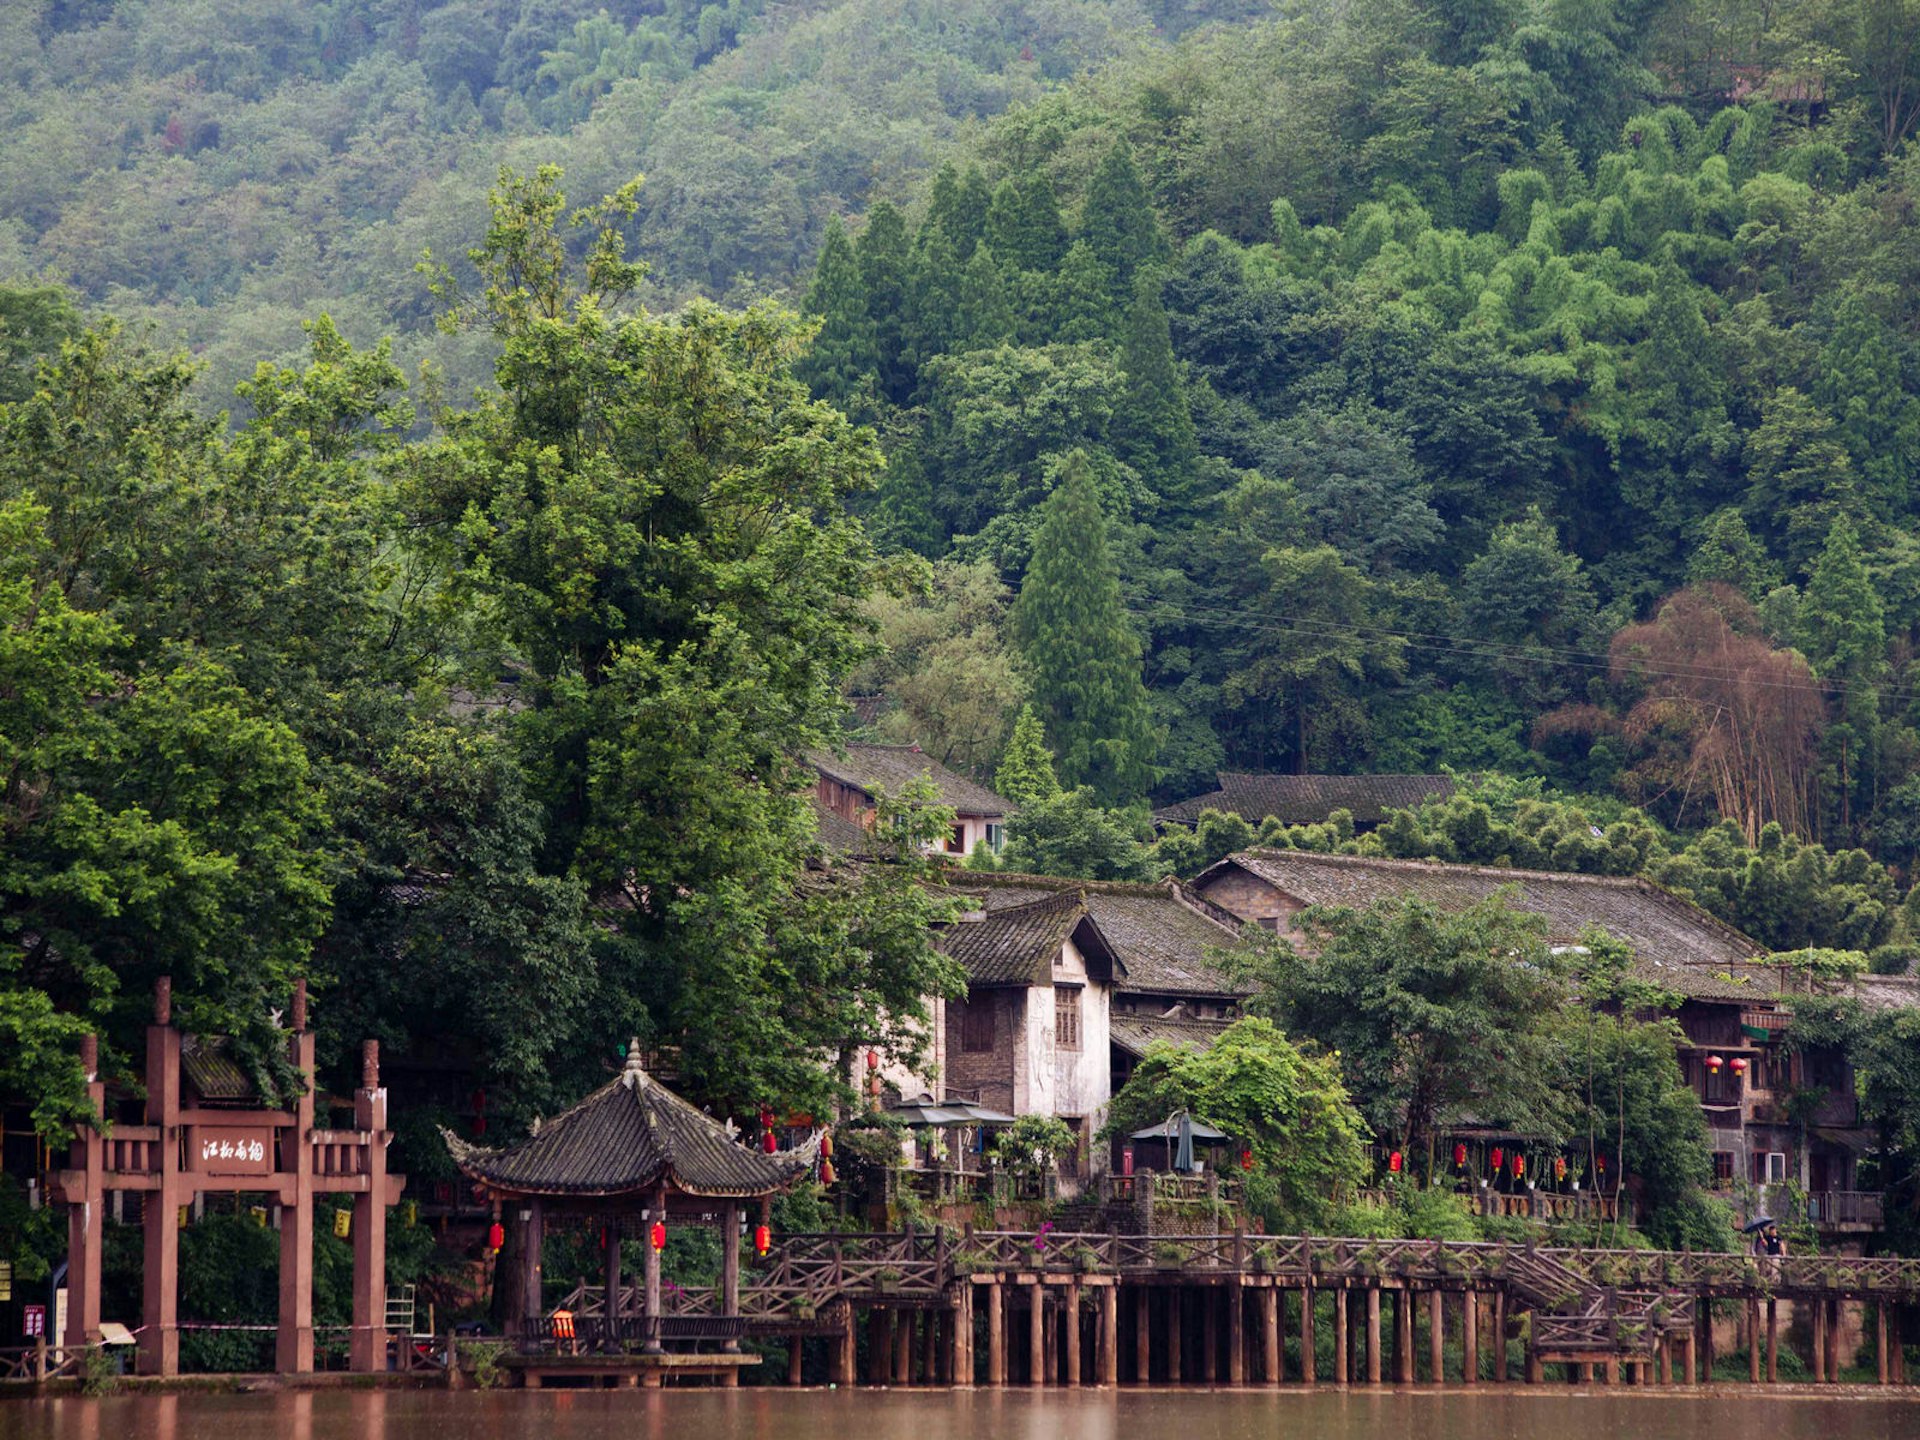 A wooden boardwalk traces the riverfront of sleepy Liujiang © Stephen Lioy / Lonely Planet